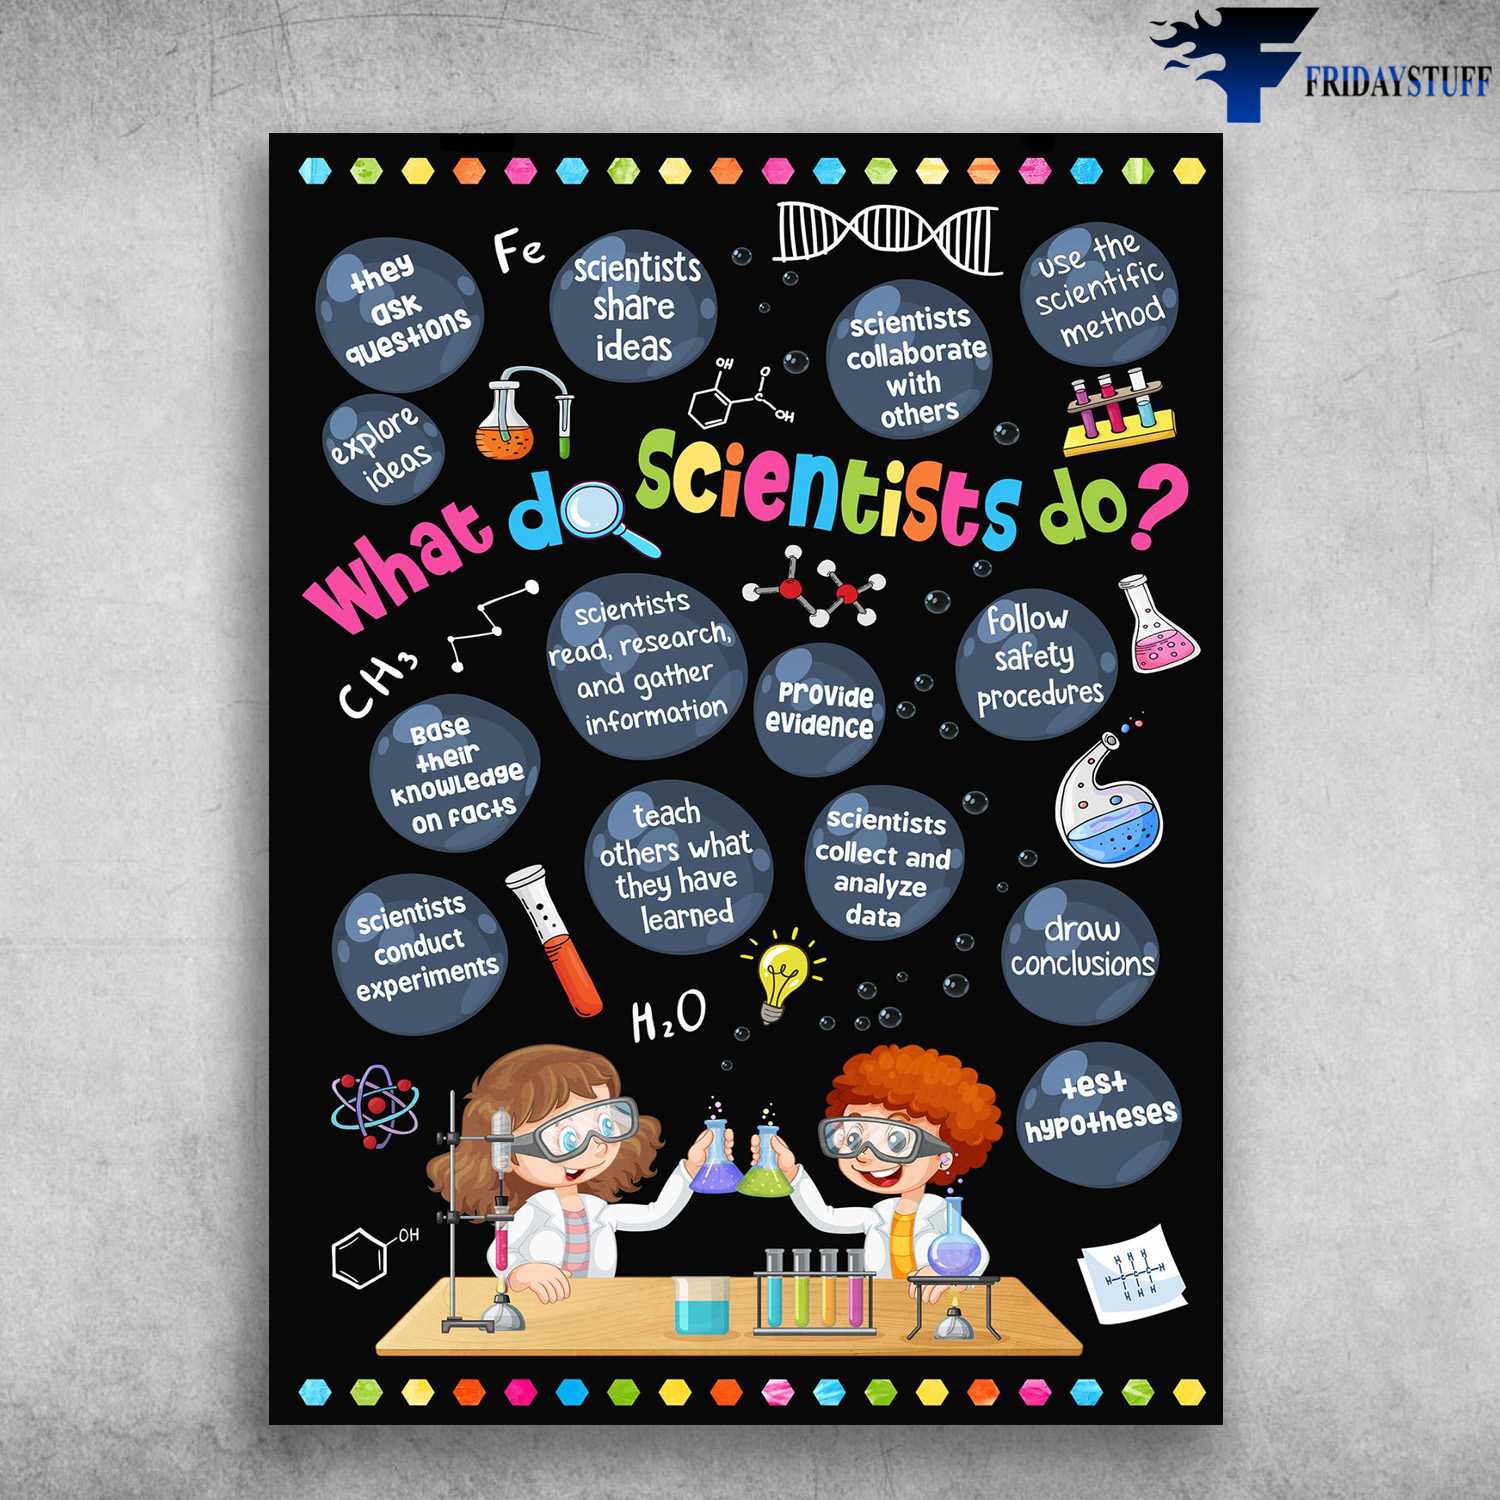 Scientists Poster, Scientists Class, What Do Scientists do, They Ask Questions, Scientists Share I Dears, Explore Idears, Scientists Collaborate With Others, Use The Scientific Method